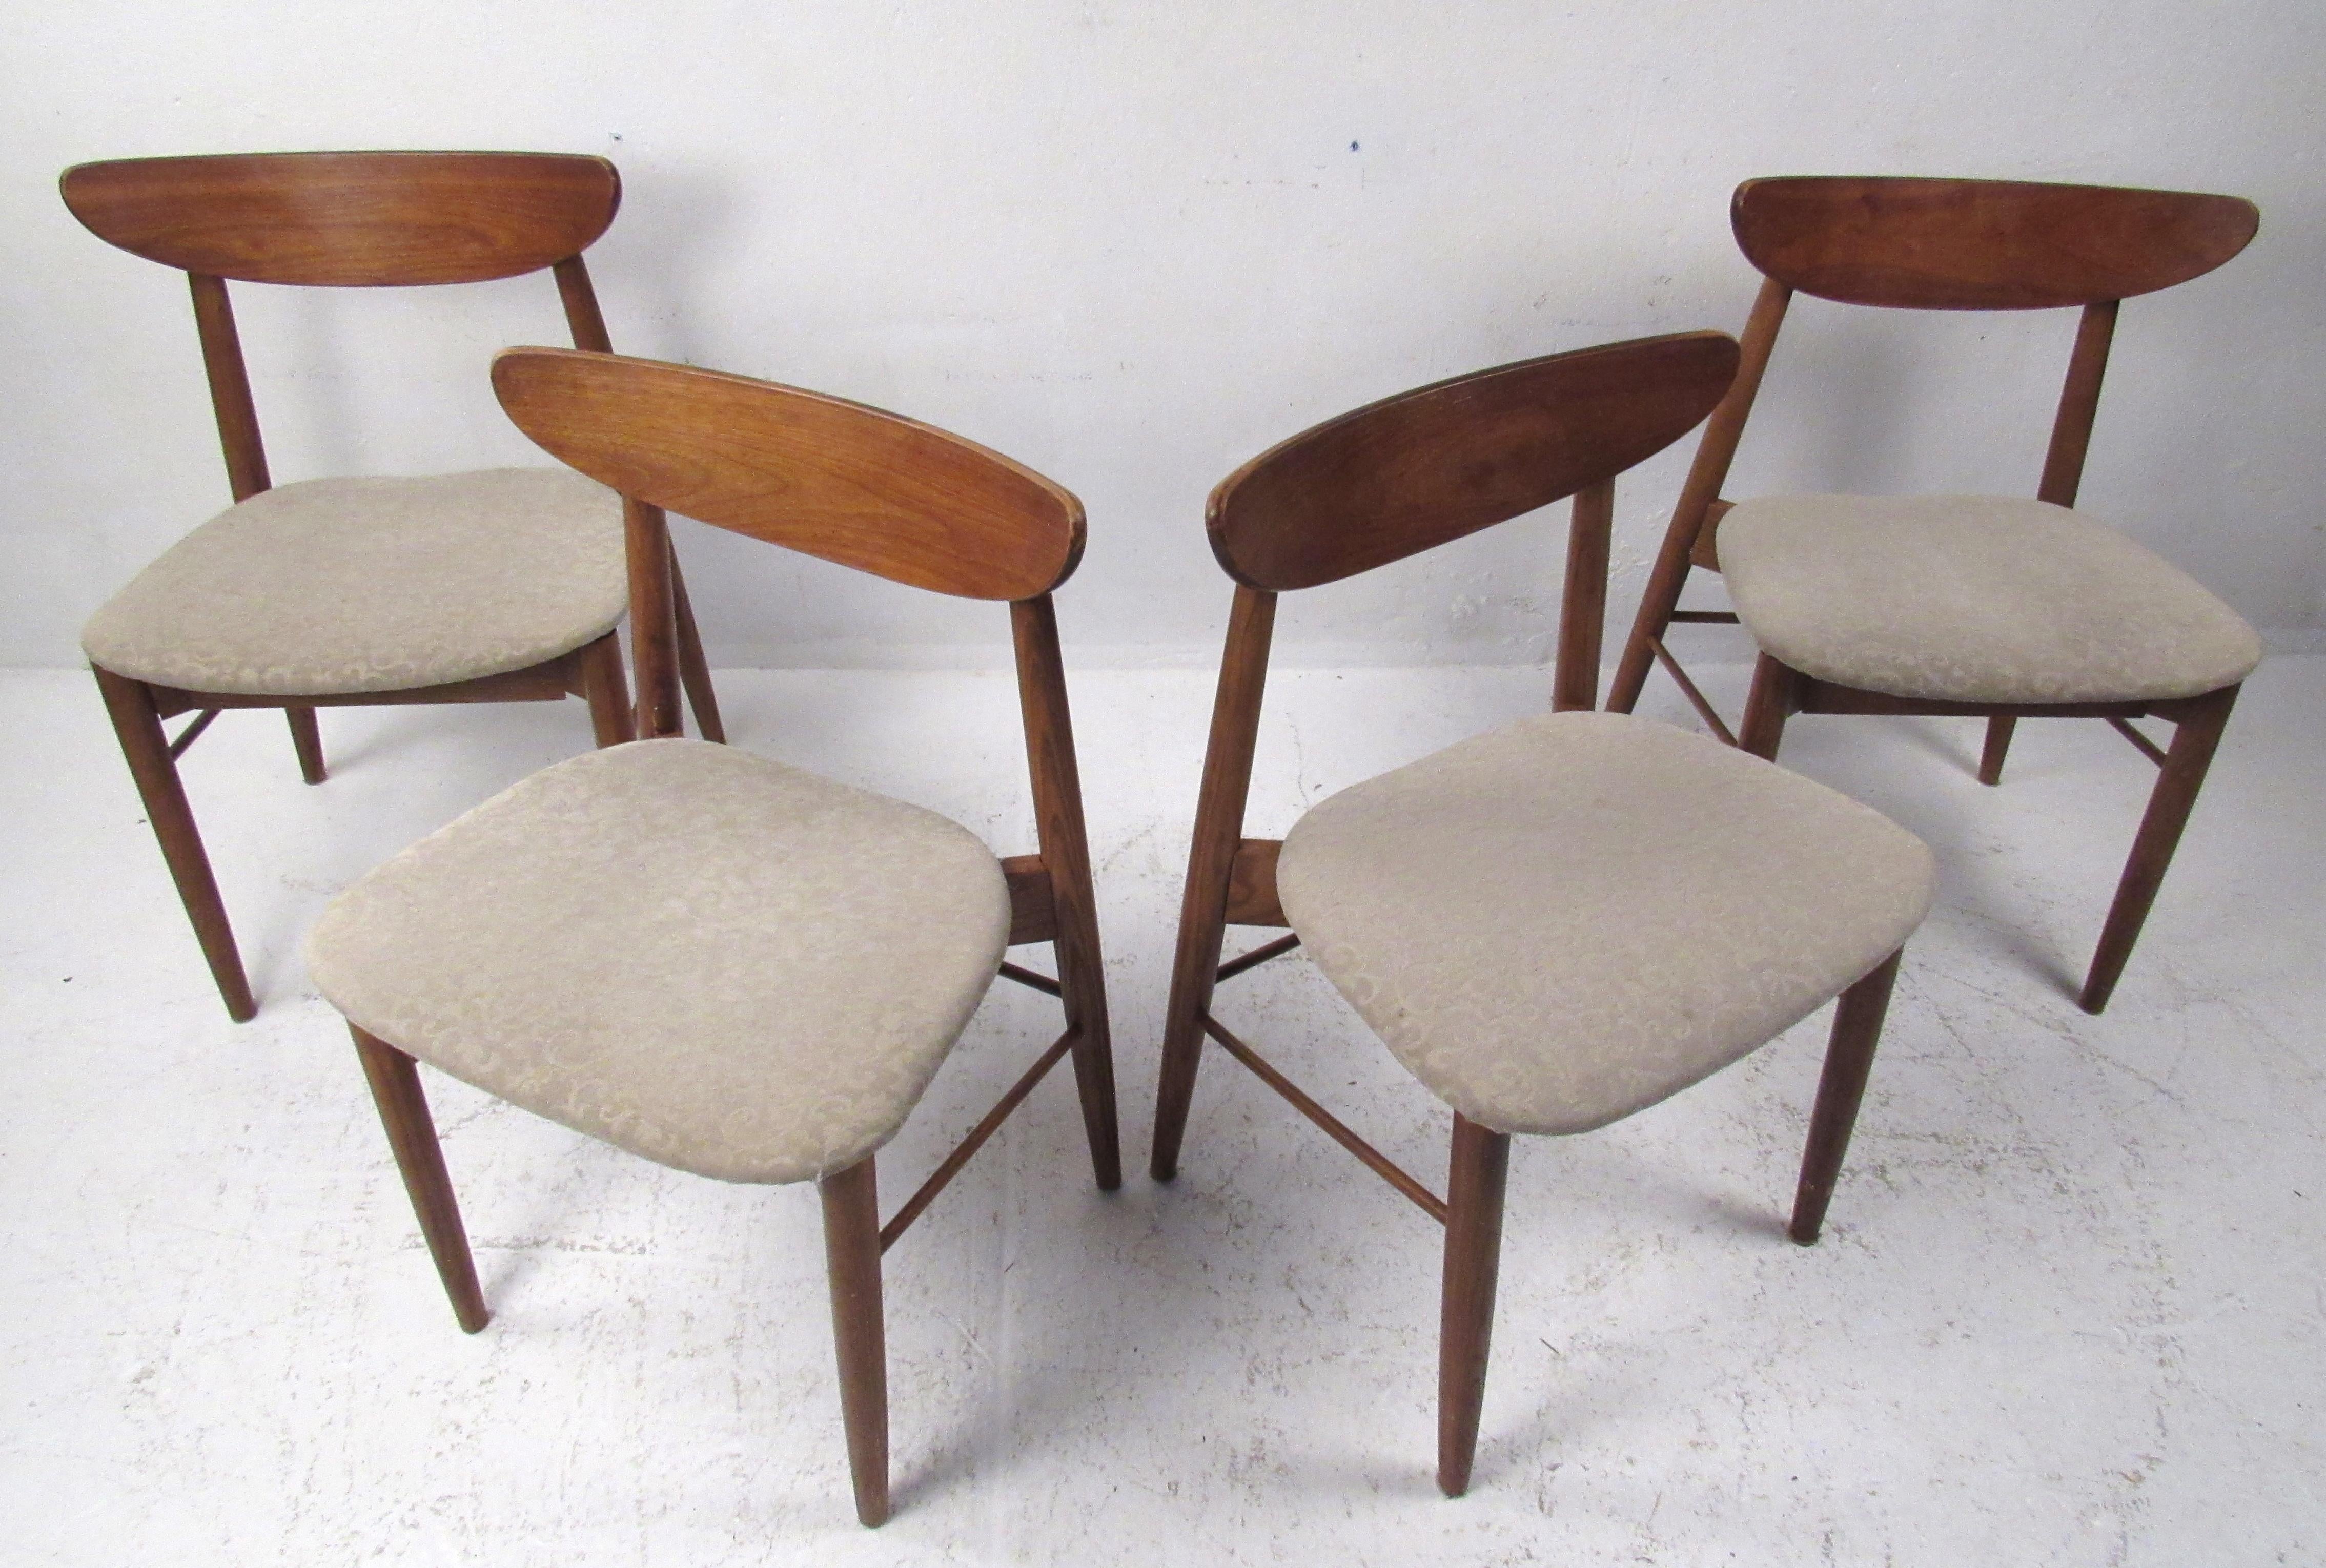 This beautiful set of four vintage modern dining chairs boast curved backrests and tapered legs. The stylish walnut frame and thick padded cushion ensure maximum comfort without sacrificing style. These lovely side chairs make the perfect addition